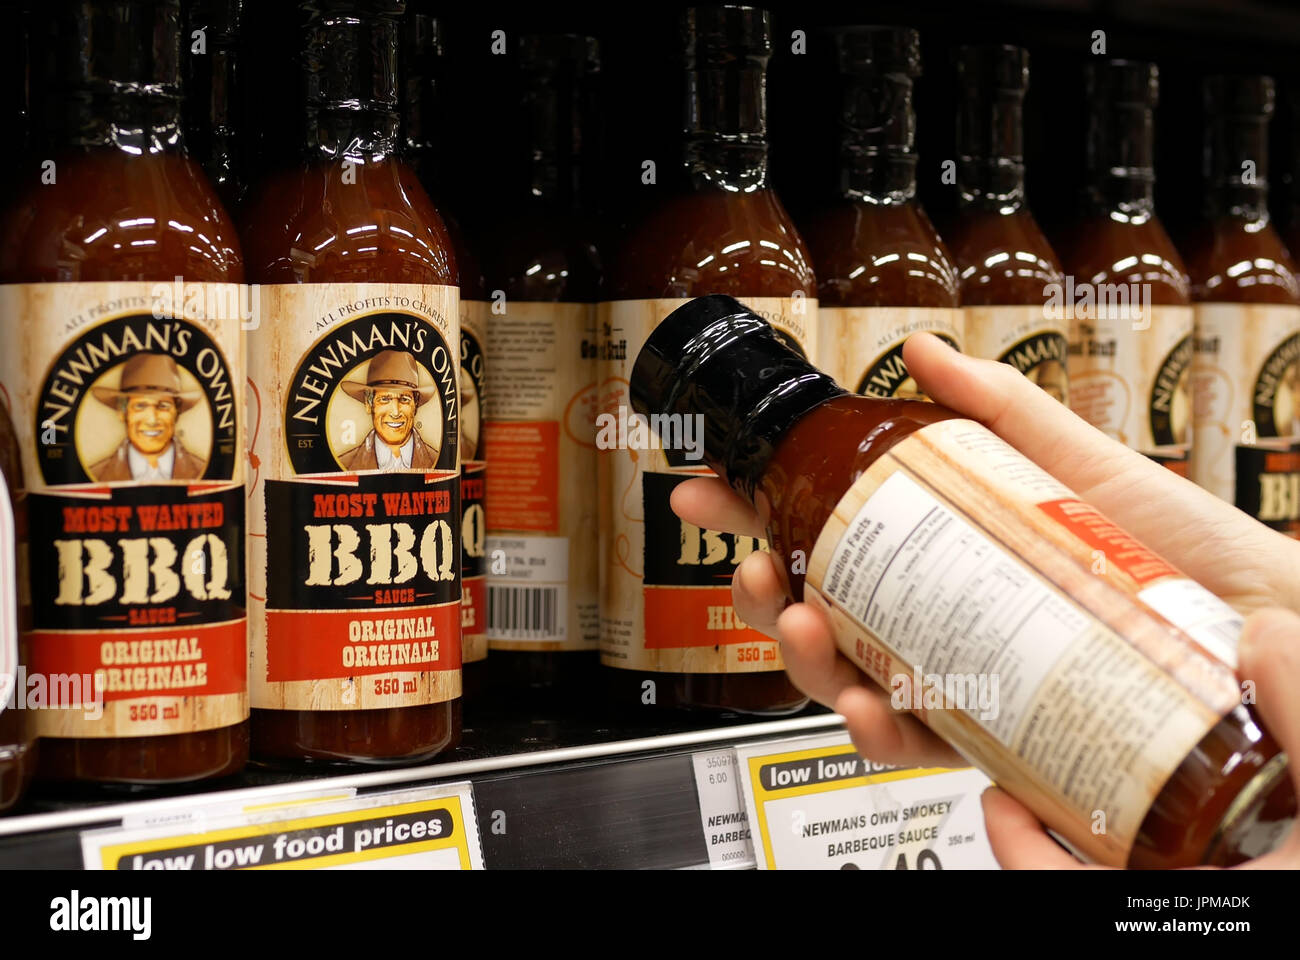 New Westminster, BC, Canada - April 15, 2017 : Woman checking Newmans bbq sauce ingredients inside buy low foods store Stock Photo